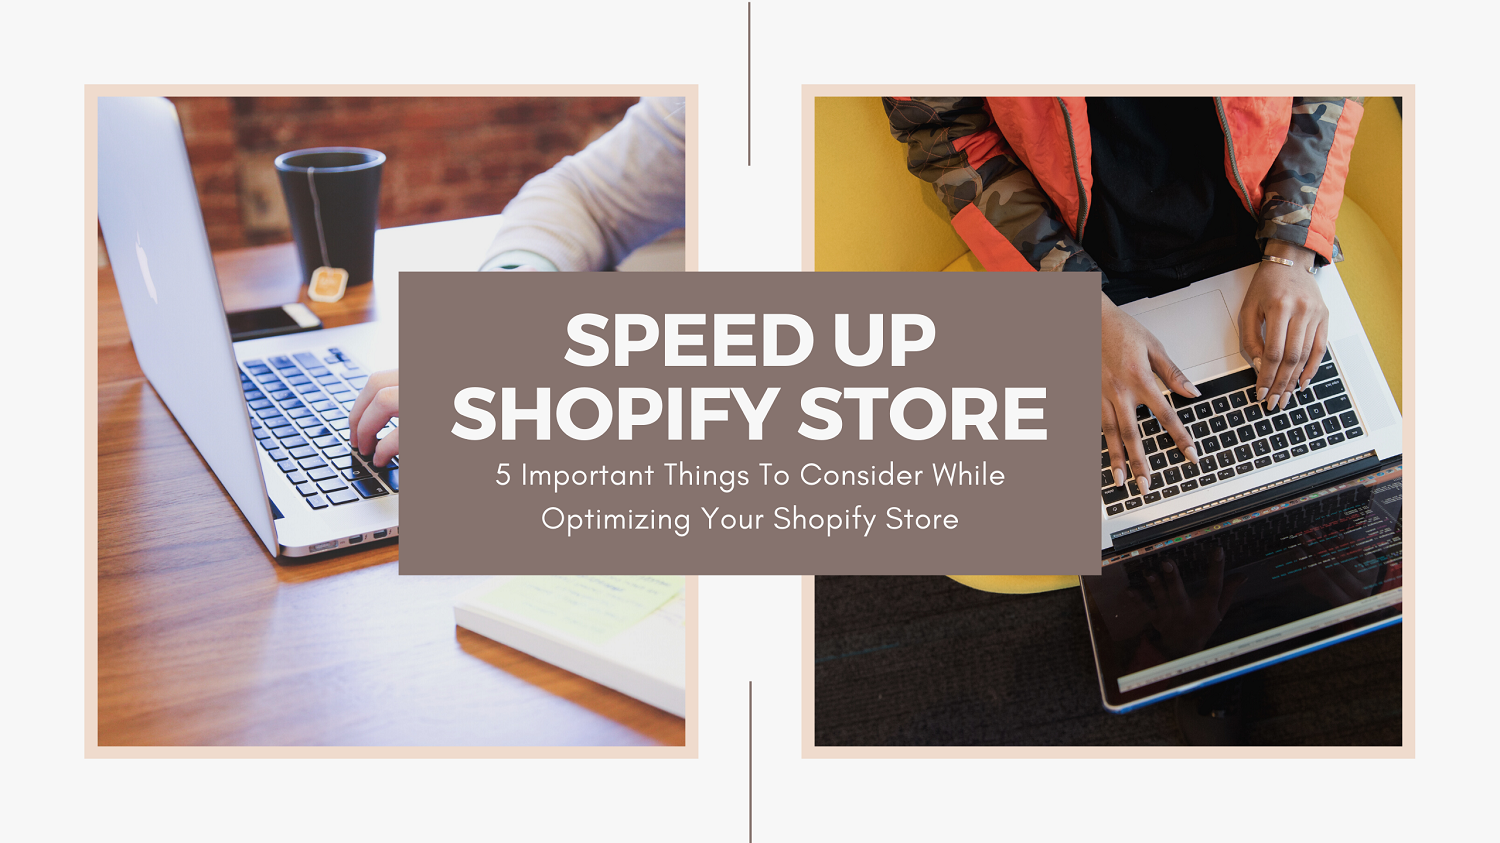 5 Important Things To Consider While Optimizing Your Shopify Store